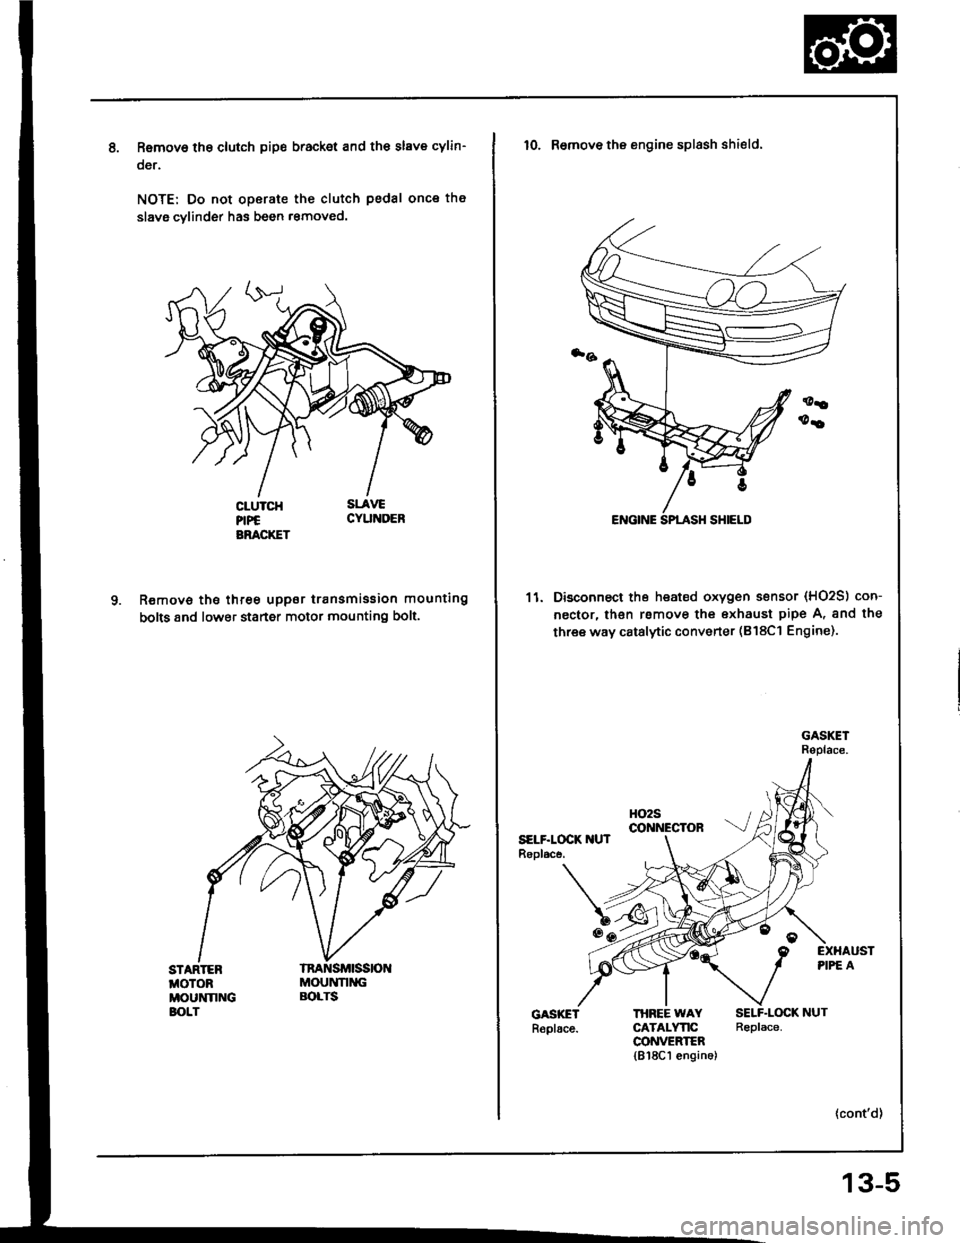 ACURA INTEGRA 1994  Service Repair Manual Removo tho clutch pip€ bracket and th€ slave cylin-
oer.
NOTE: Do not operate the clutch pedal once th€
slavg cvlinder has been r€moved.
R€move the three uppor transmission mounting
bolts 8n